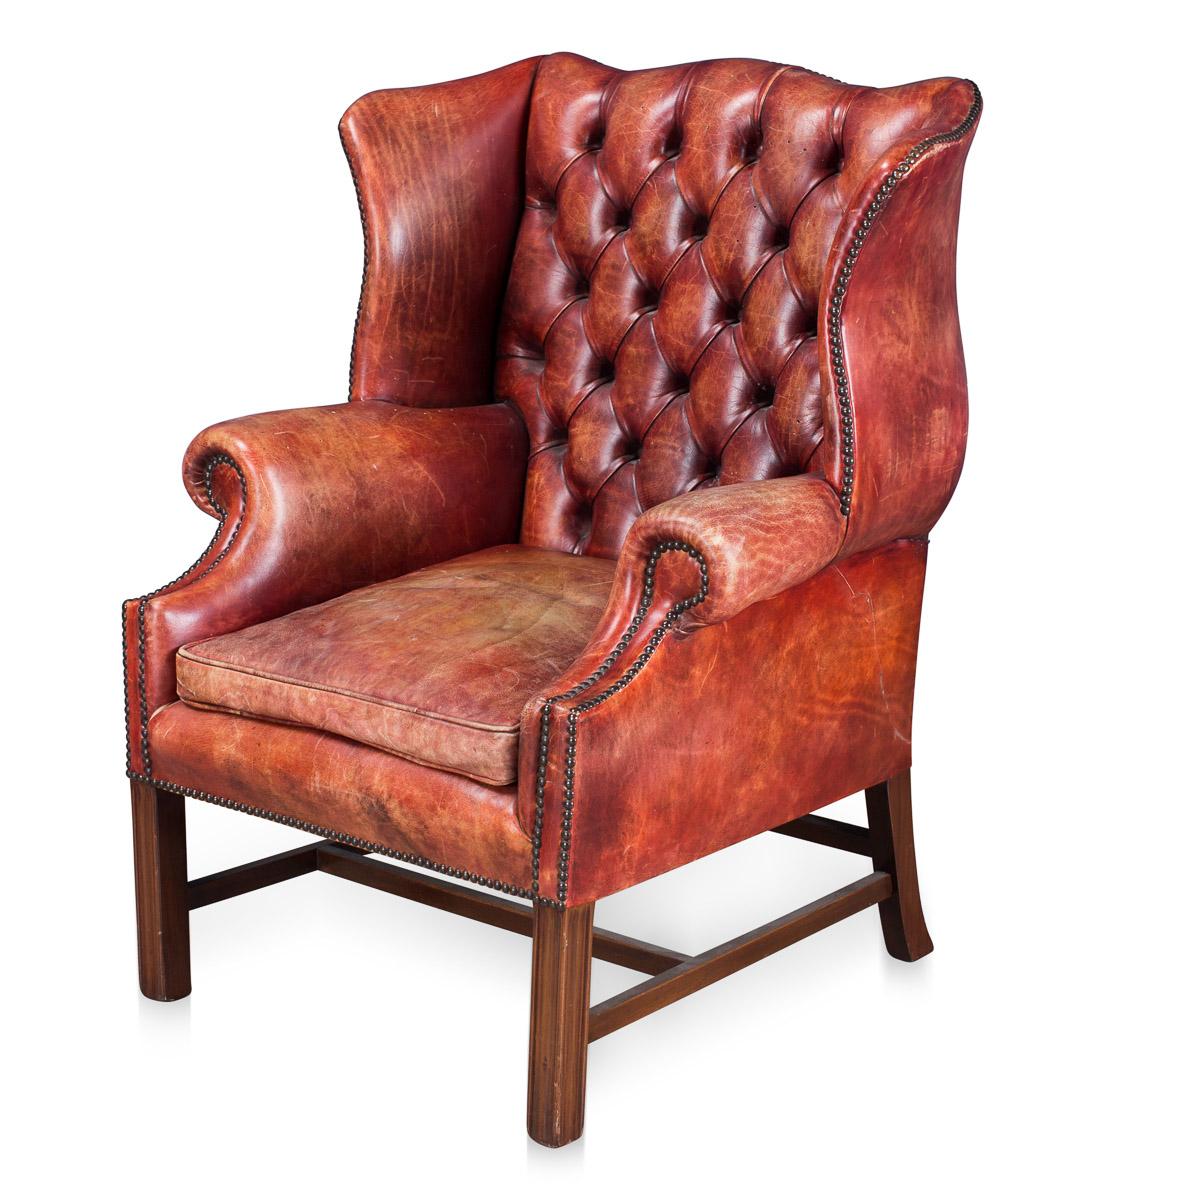 A lovely example of English leather craftsmanship. Dating to the early to mid-20th century, this leather wing-back armchair has a beautiful deep red colour, great proportions and lovely patina.
Condition

Some discolouration and tiny holes (about